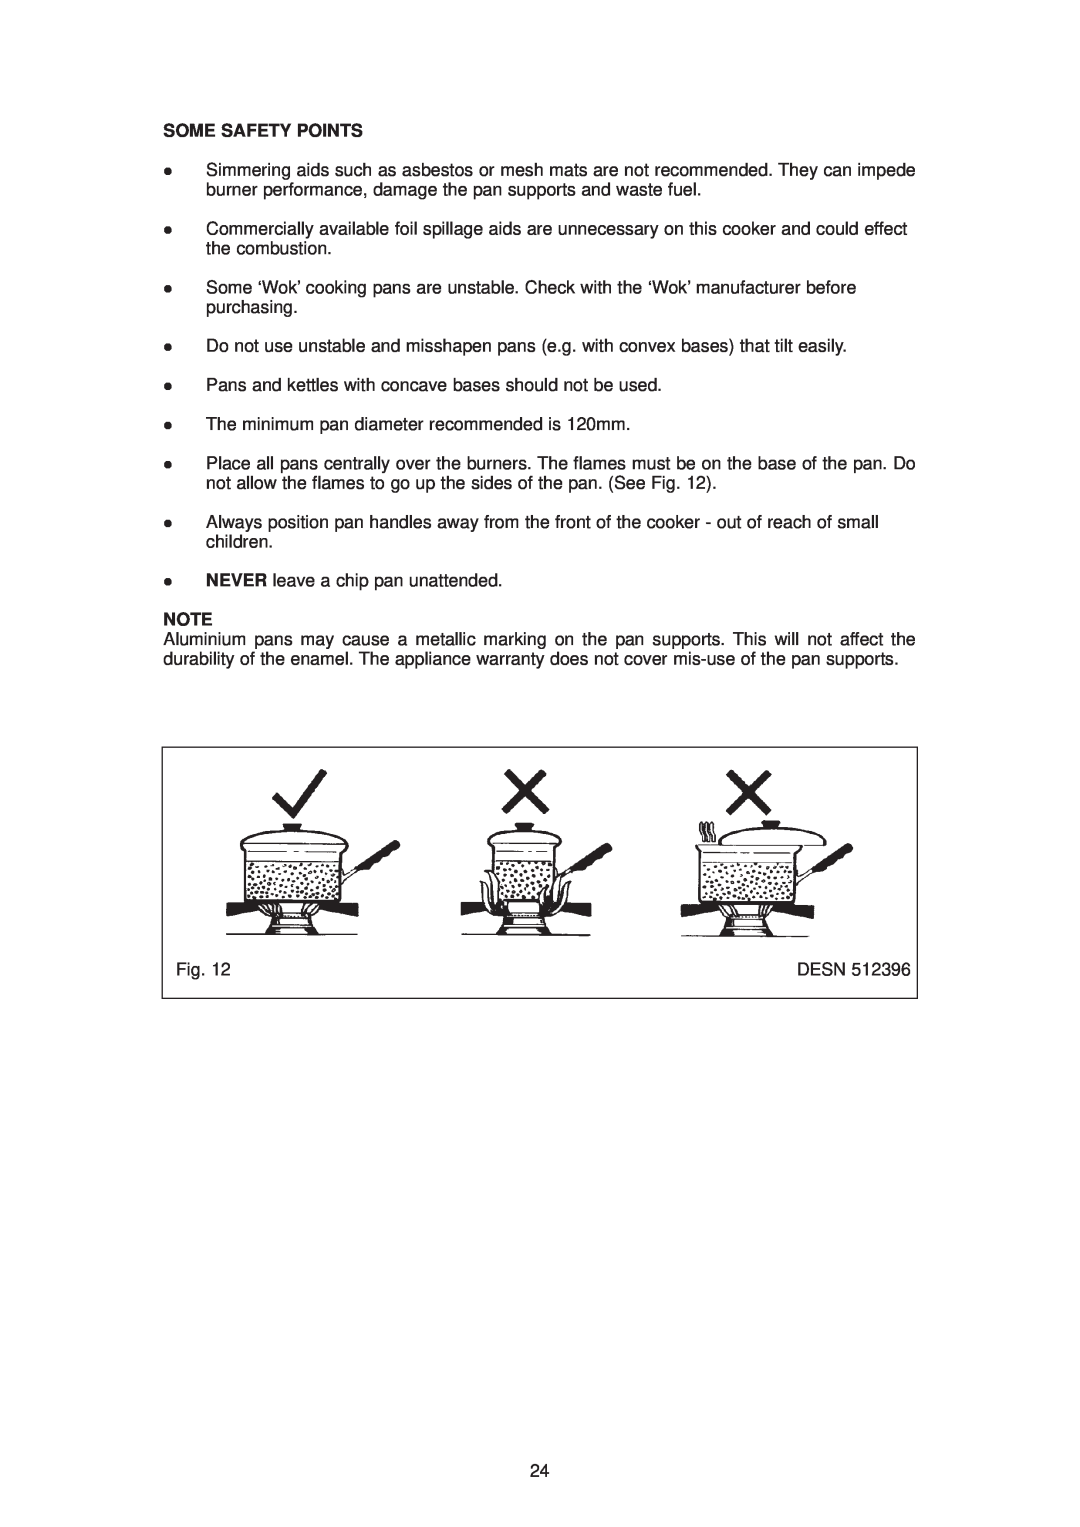 Aga Ranges DESN 512387 A owner manual Some Safety Points 